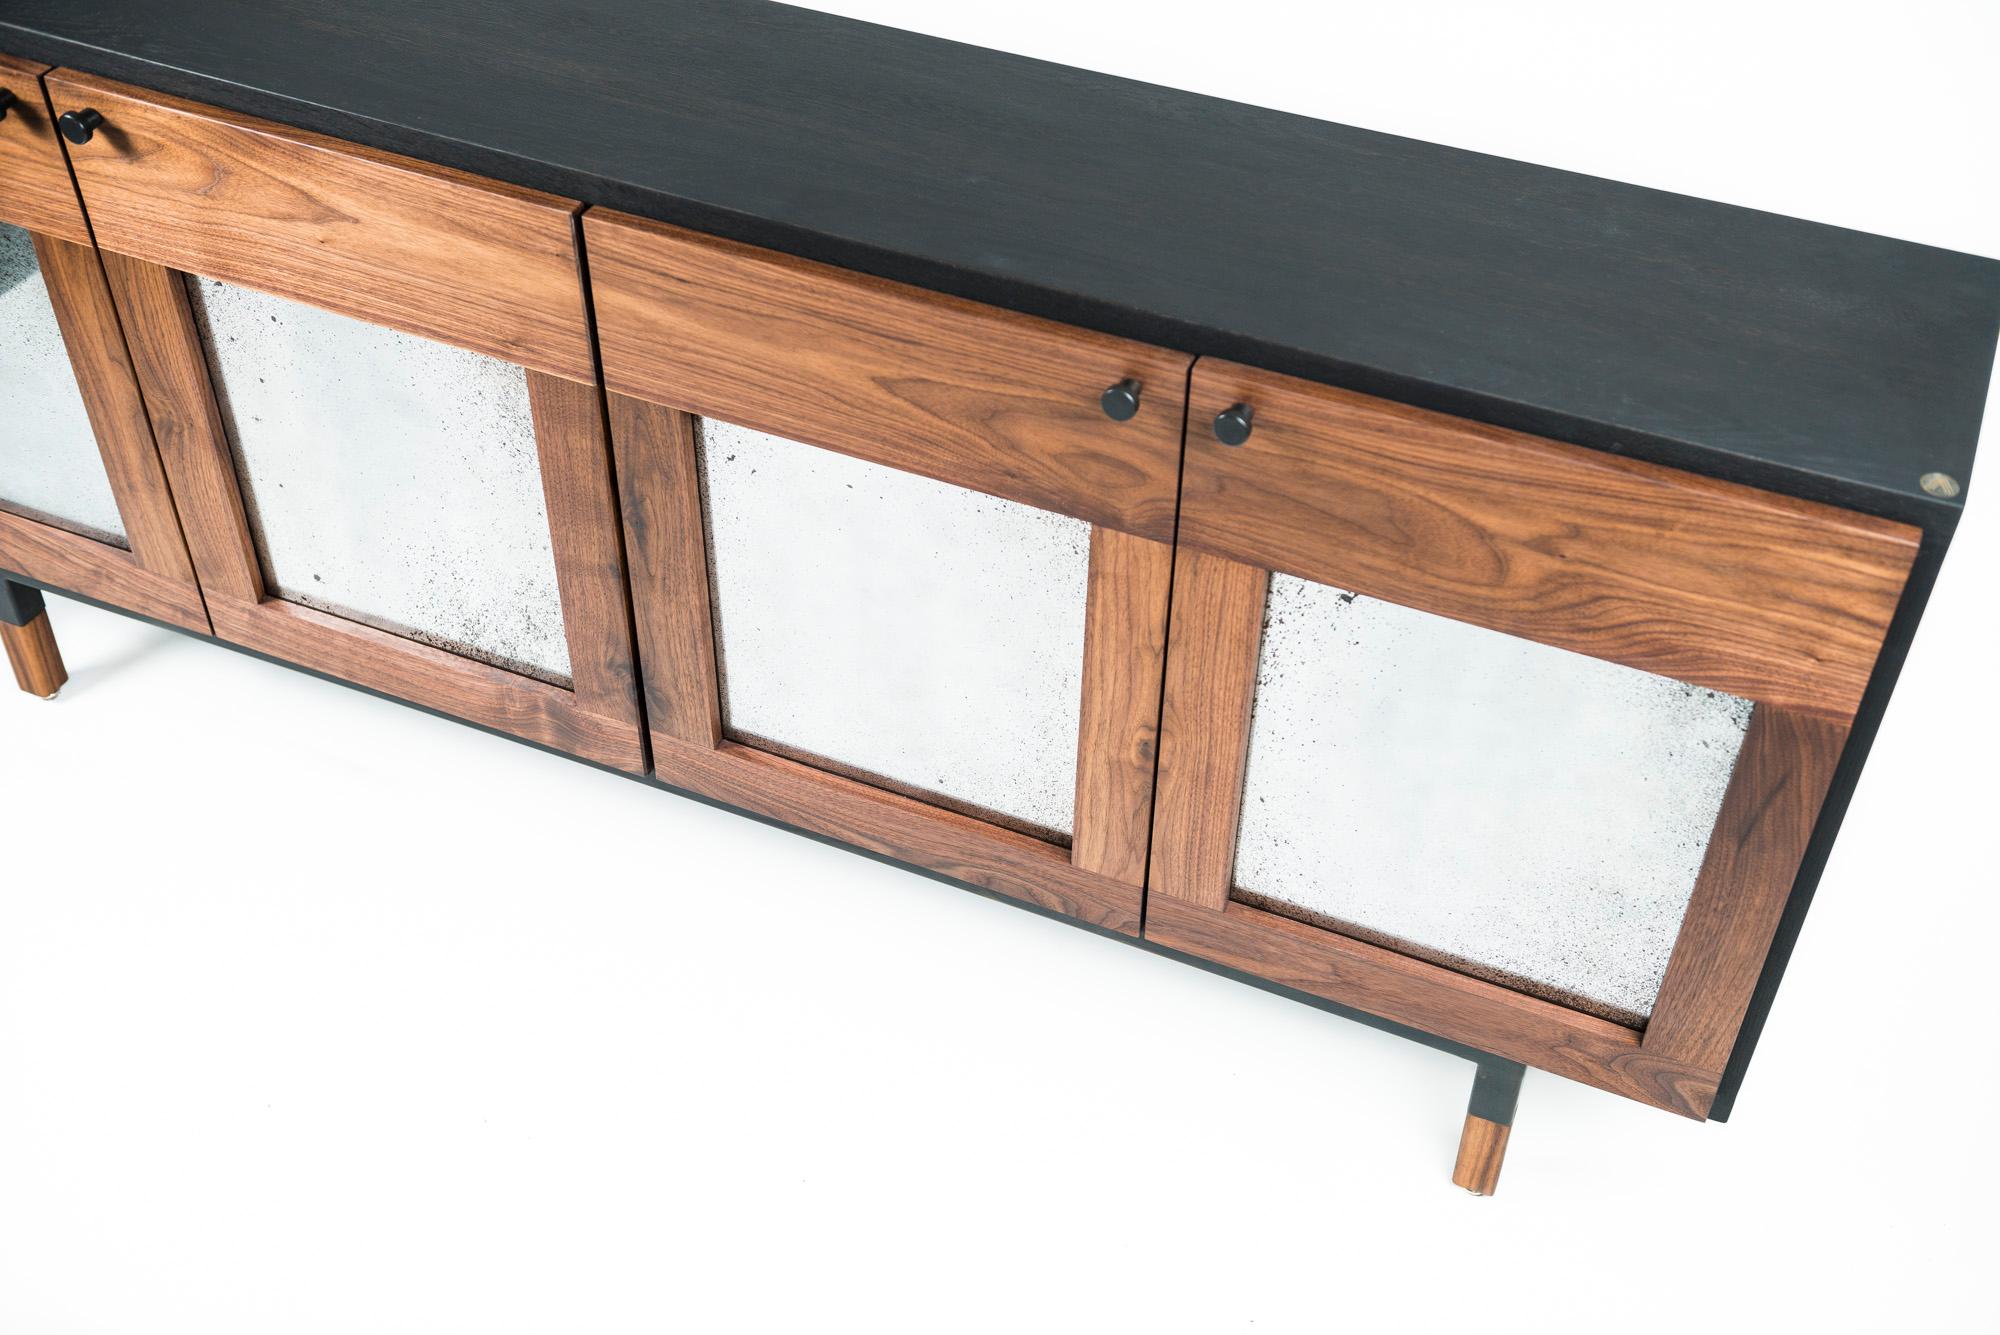 The Mansfield credenza is handcrafted from hand selected solid wood supported by a hand blackened steel frame with solid wood tenon. Designed to store and display valuable dishes, drinks of great occasions and some objects used during the meal. The